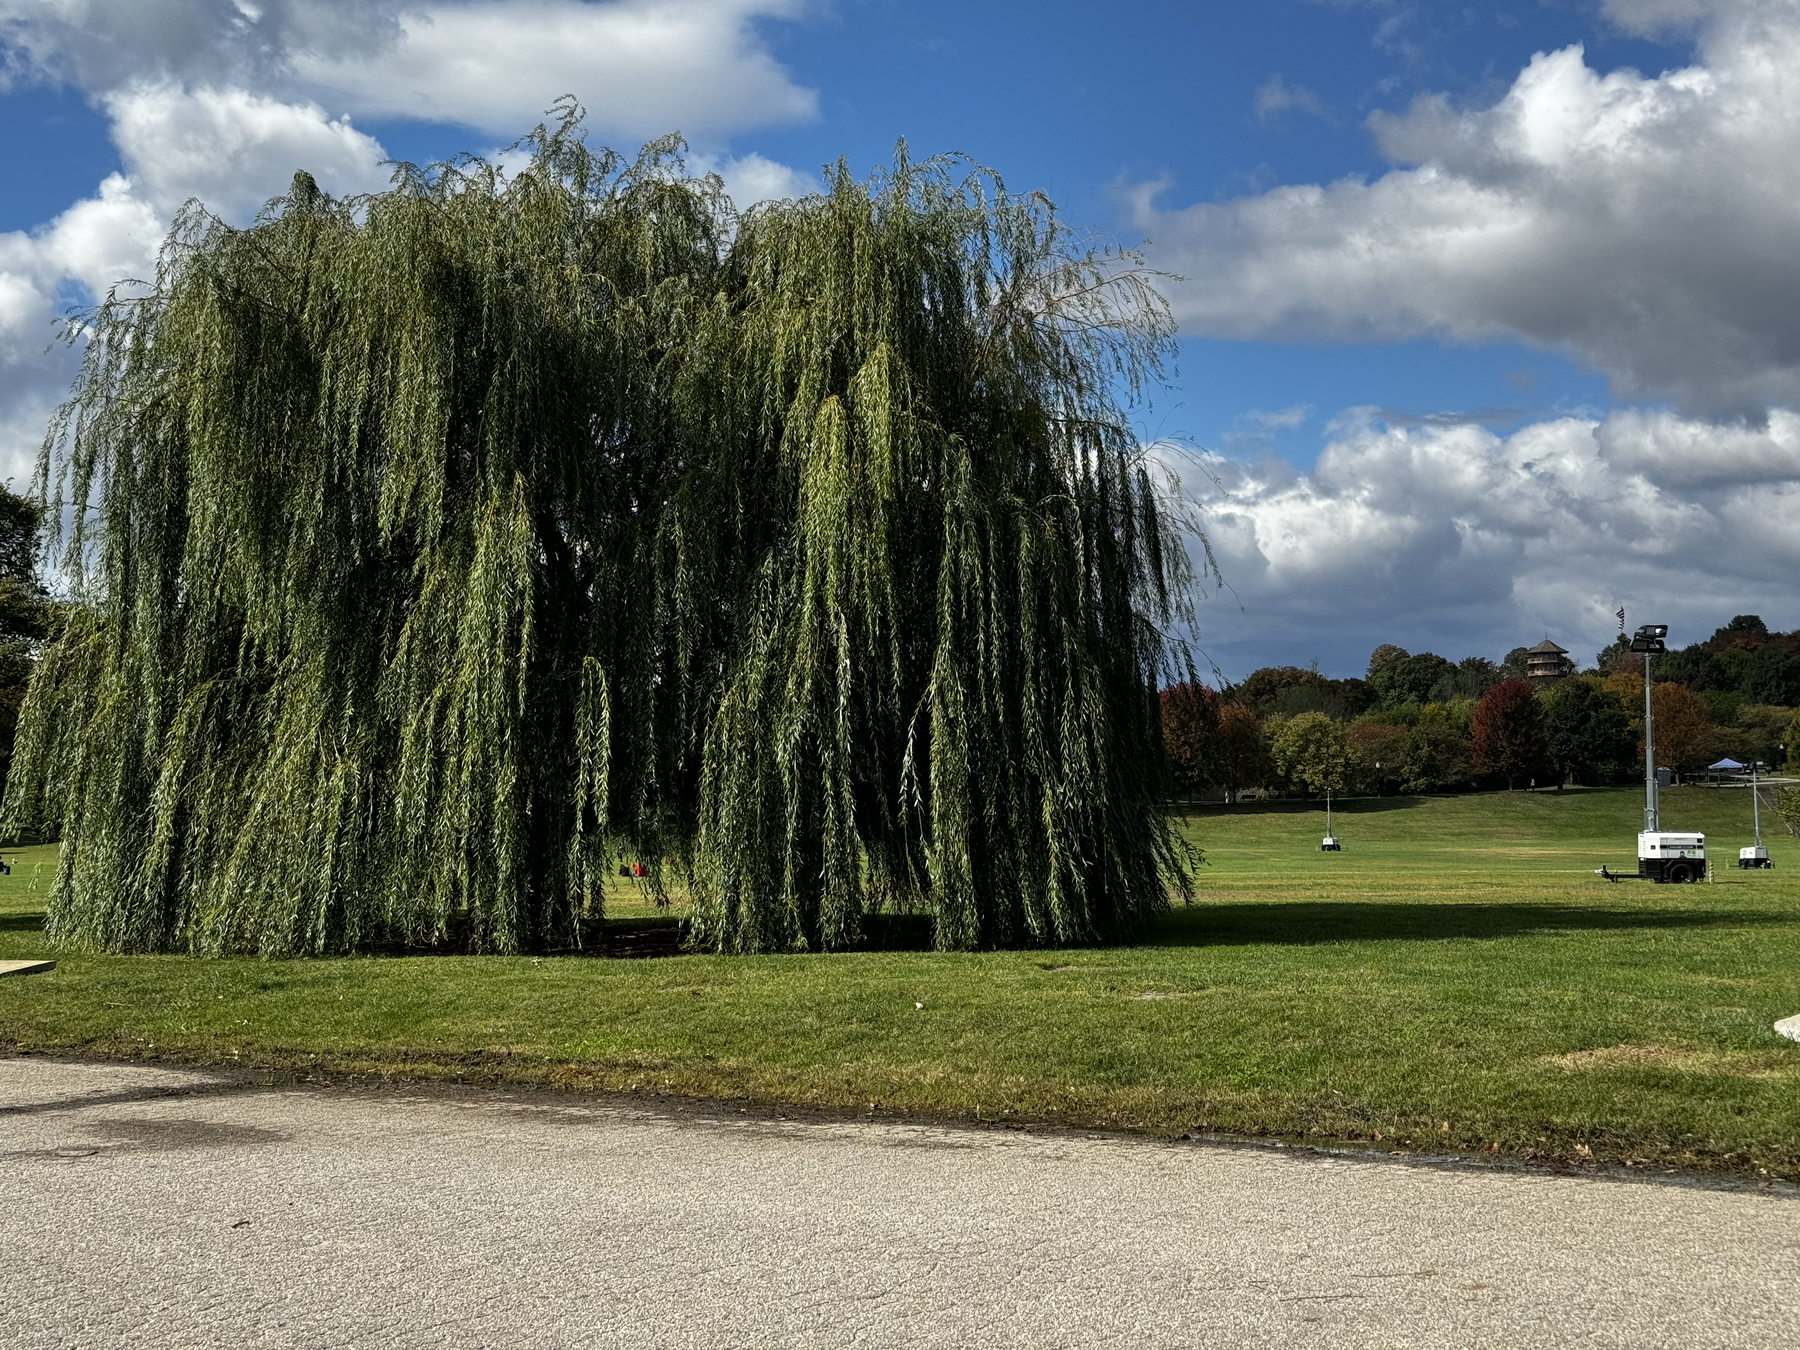 A willow tree, shockingly still, in a park.